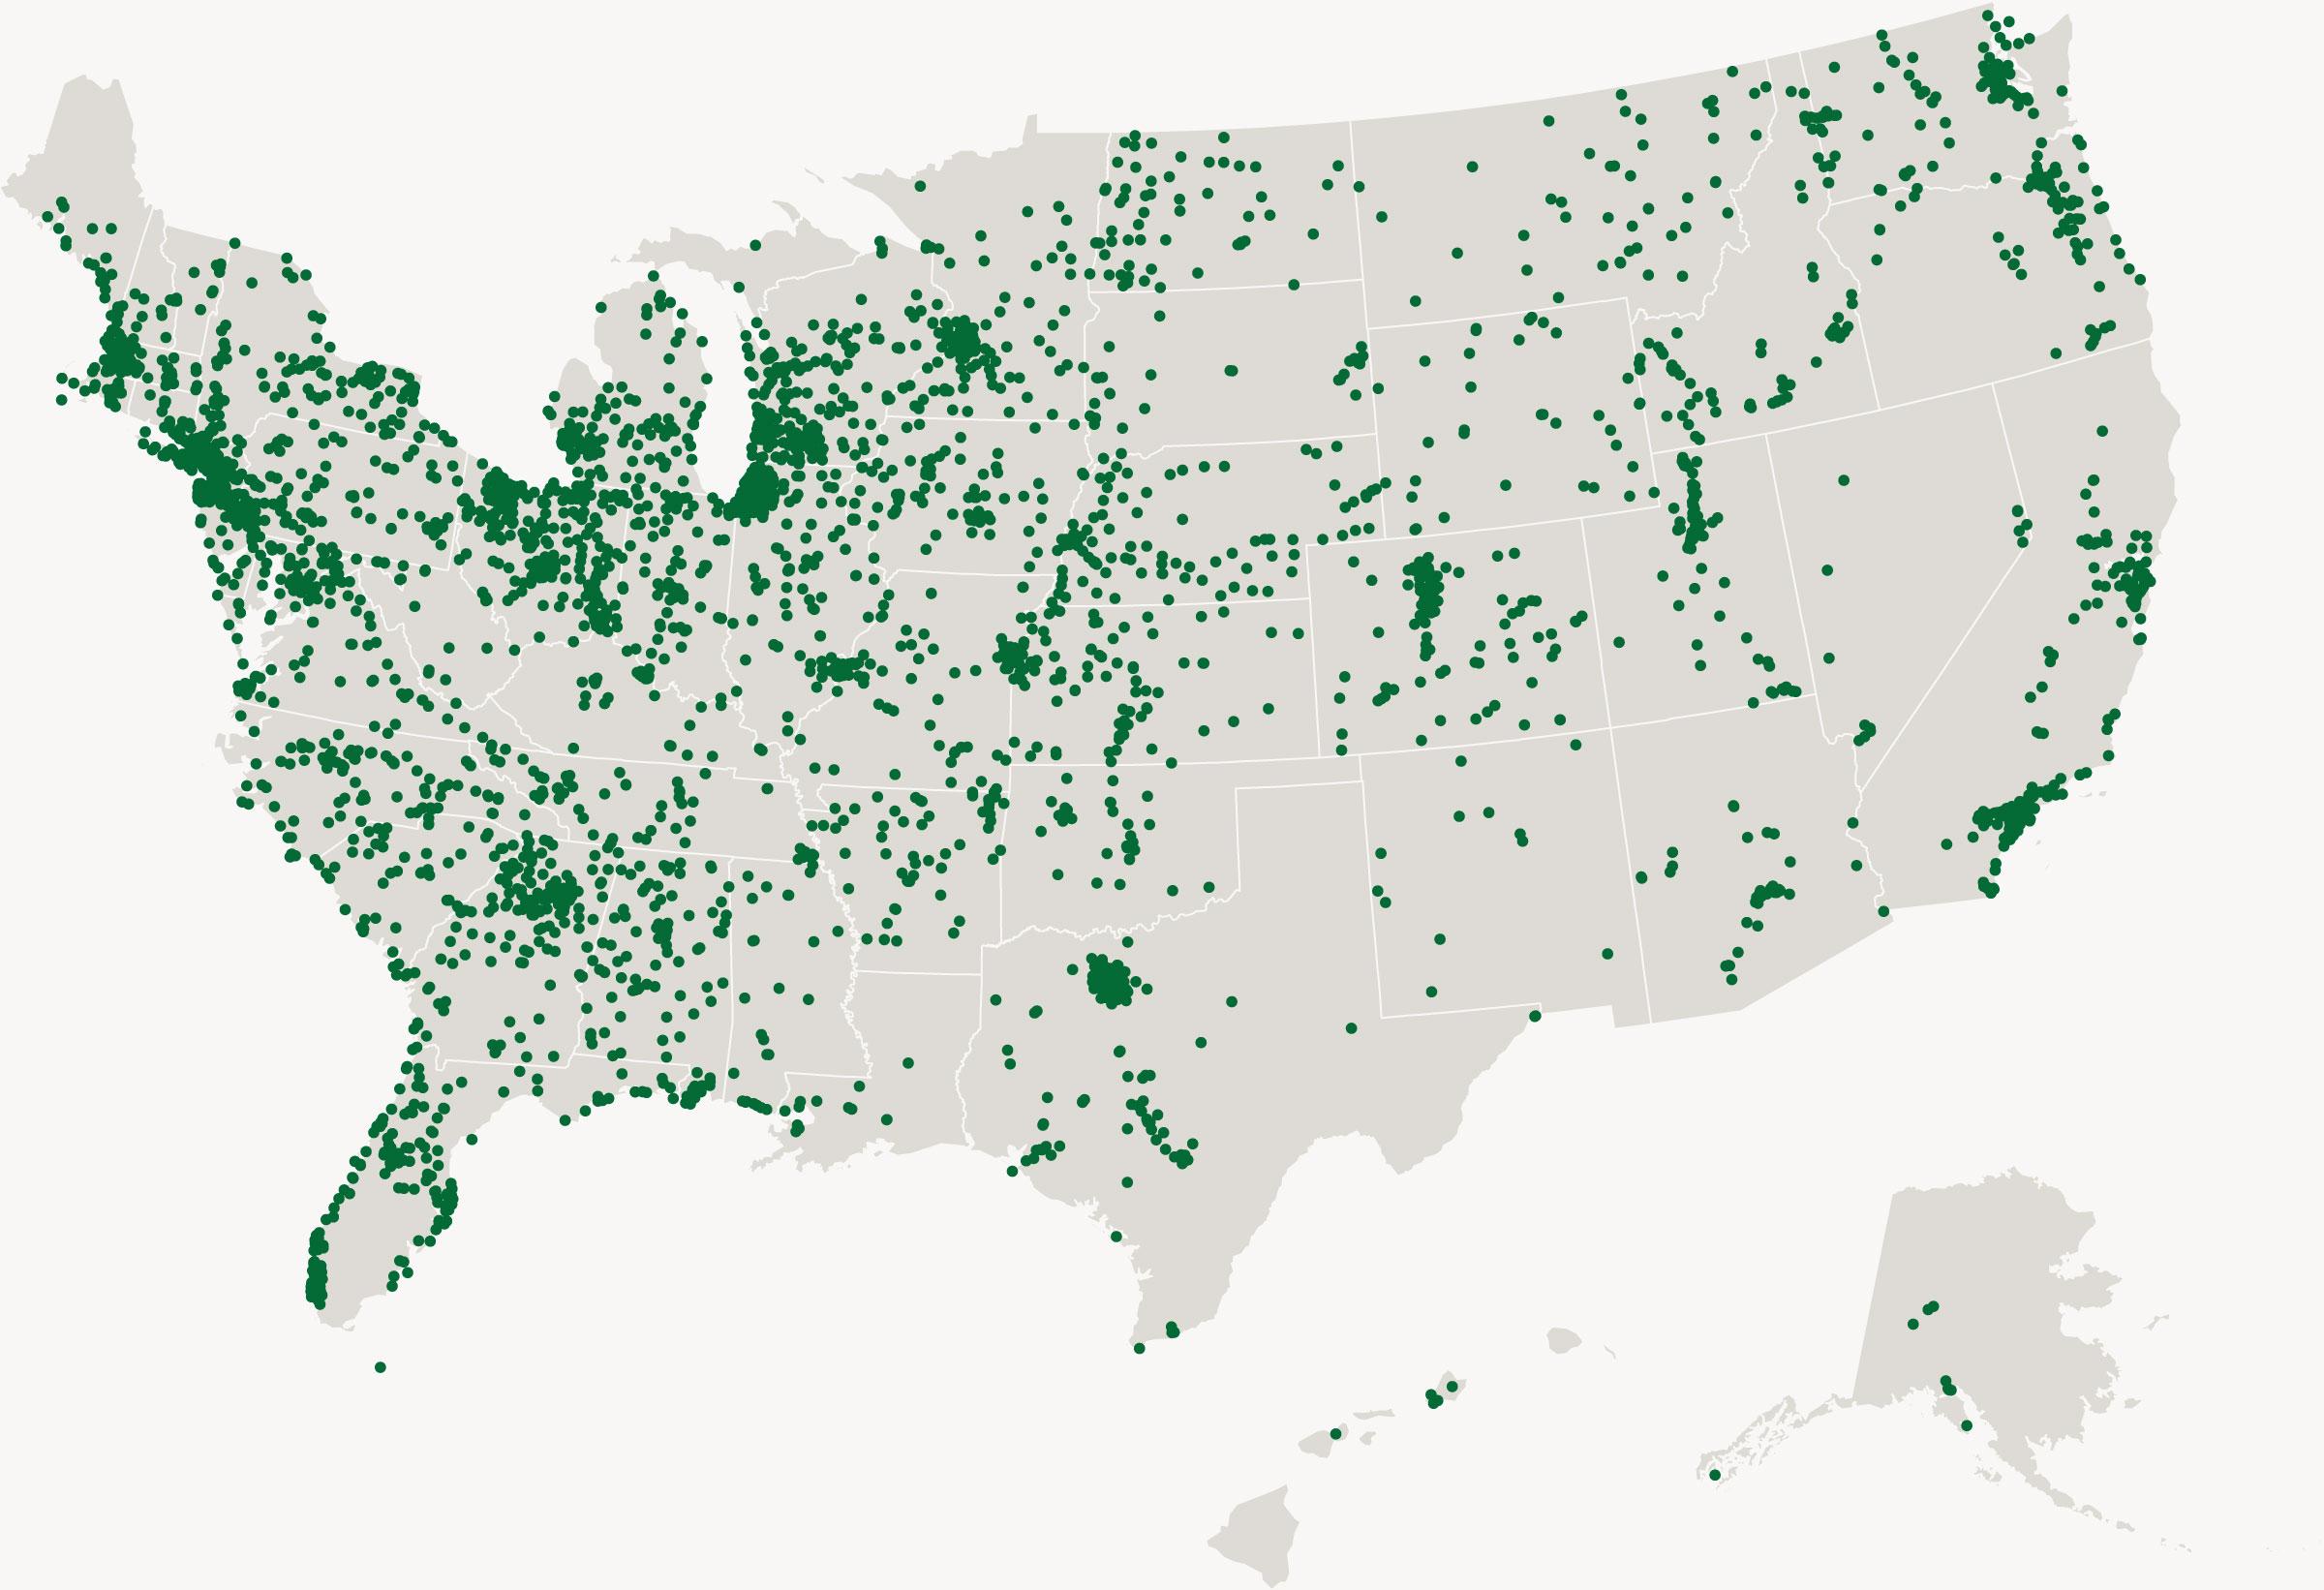 map view of Arbor Day Foundation's community planting partners in the United States